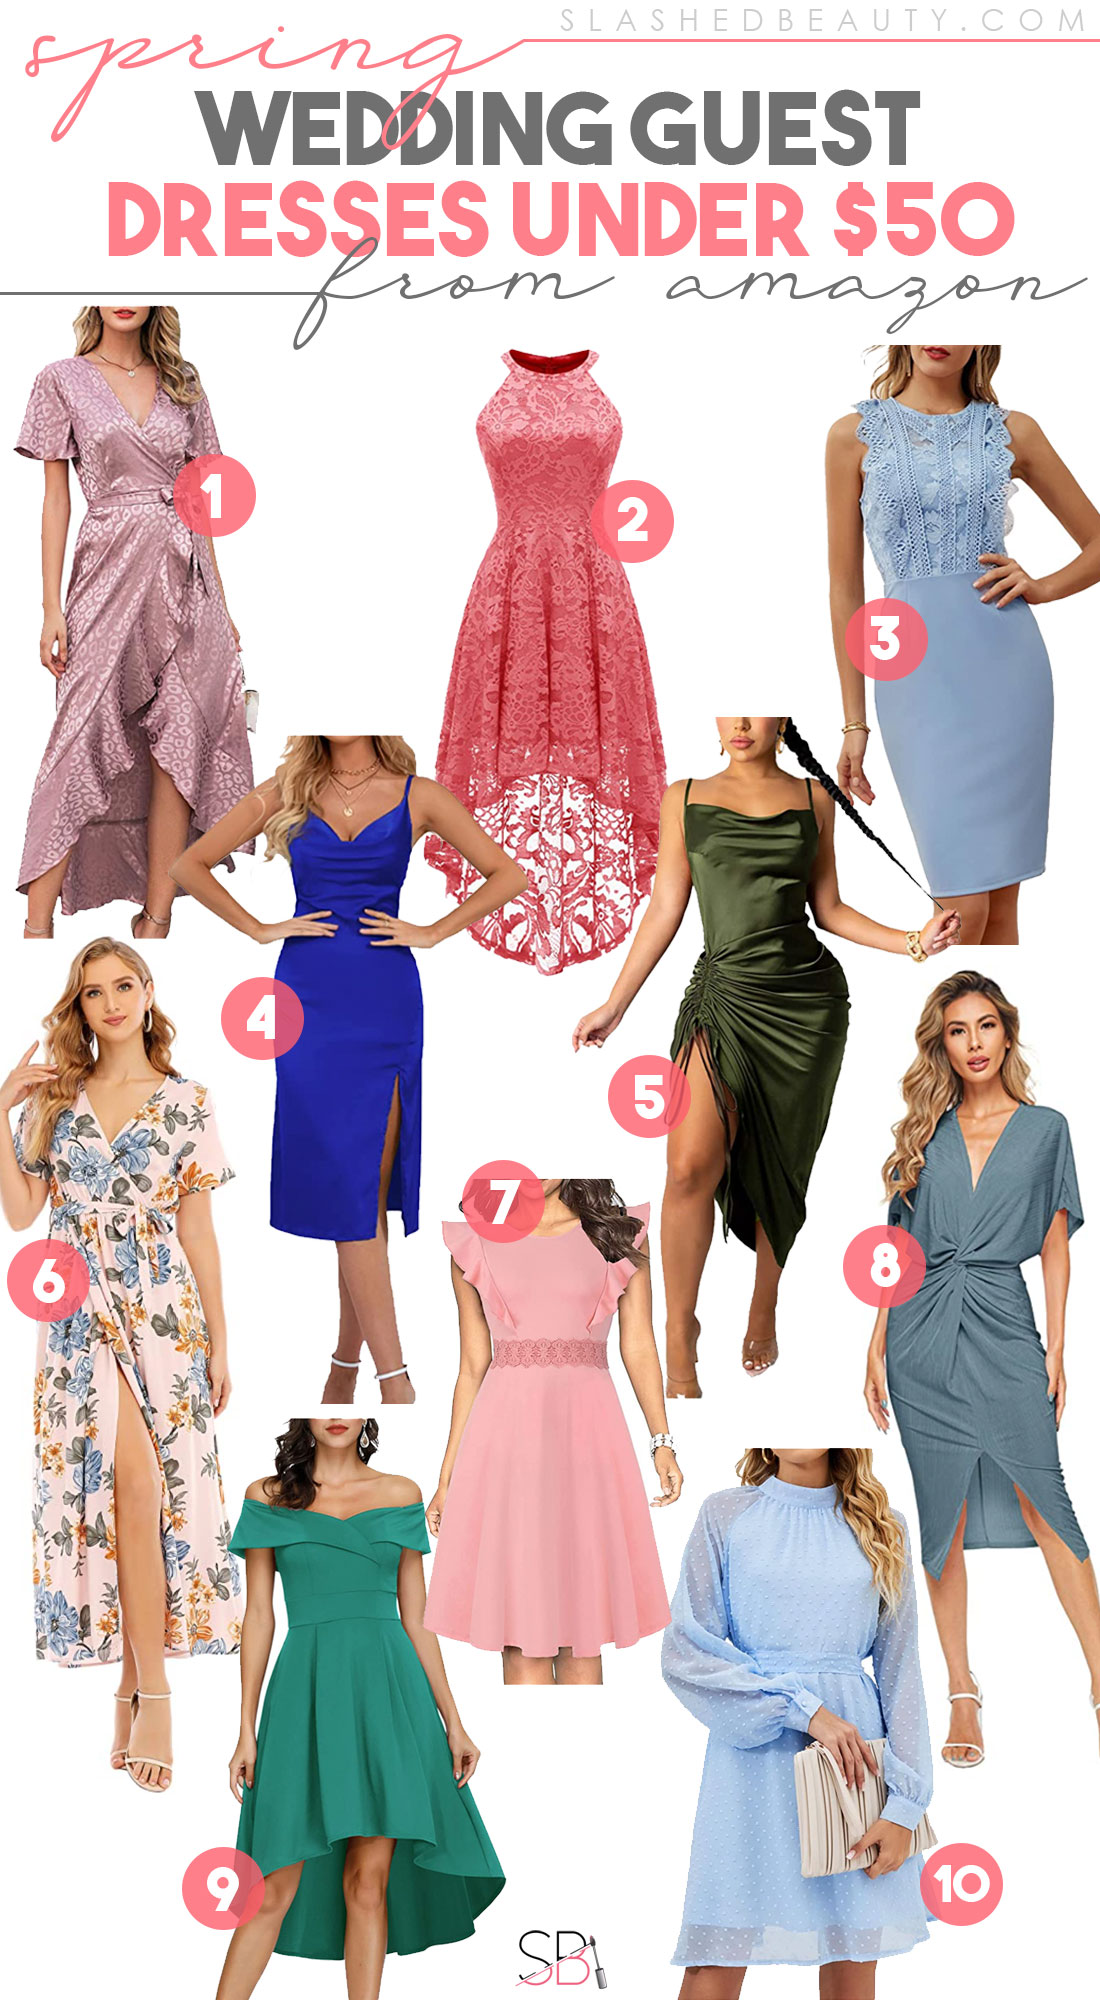 Collage of dresses with text title: Spring Wedding Guest Dresses Under $50 from Amazon | Slashed Beauty